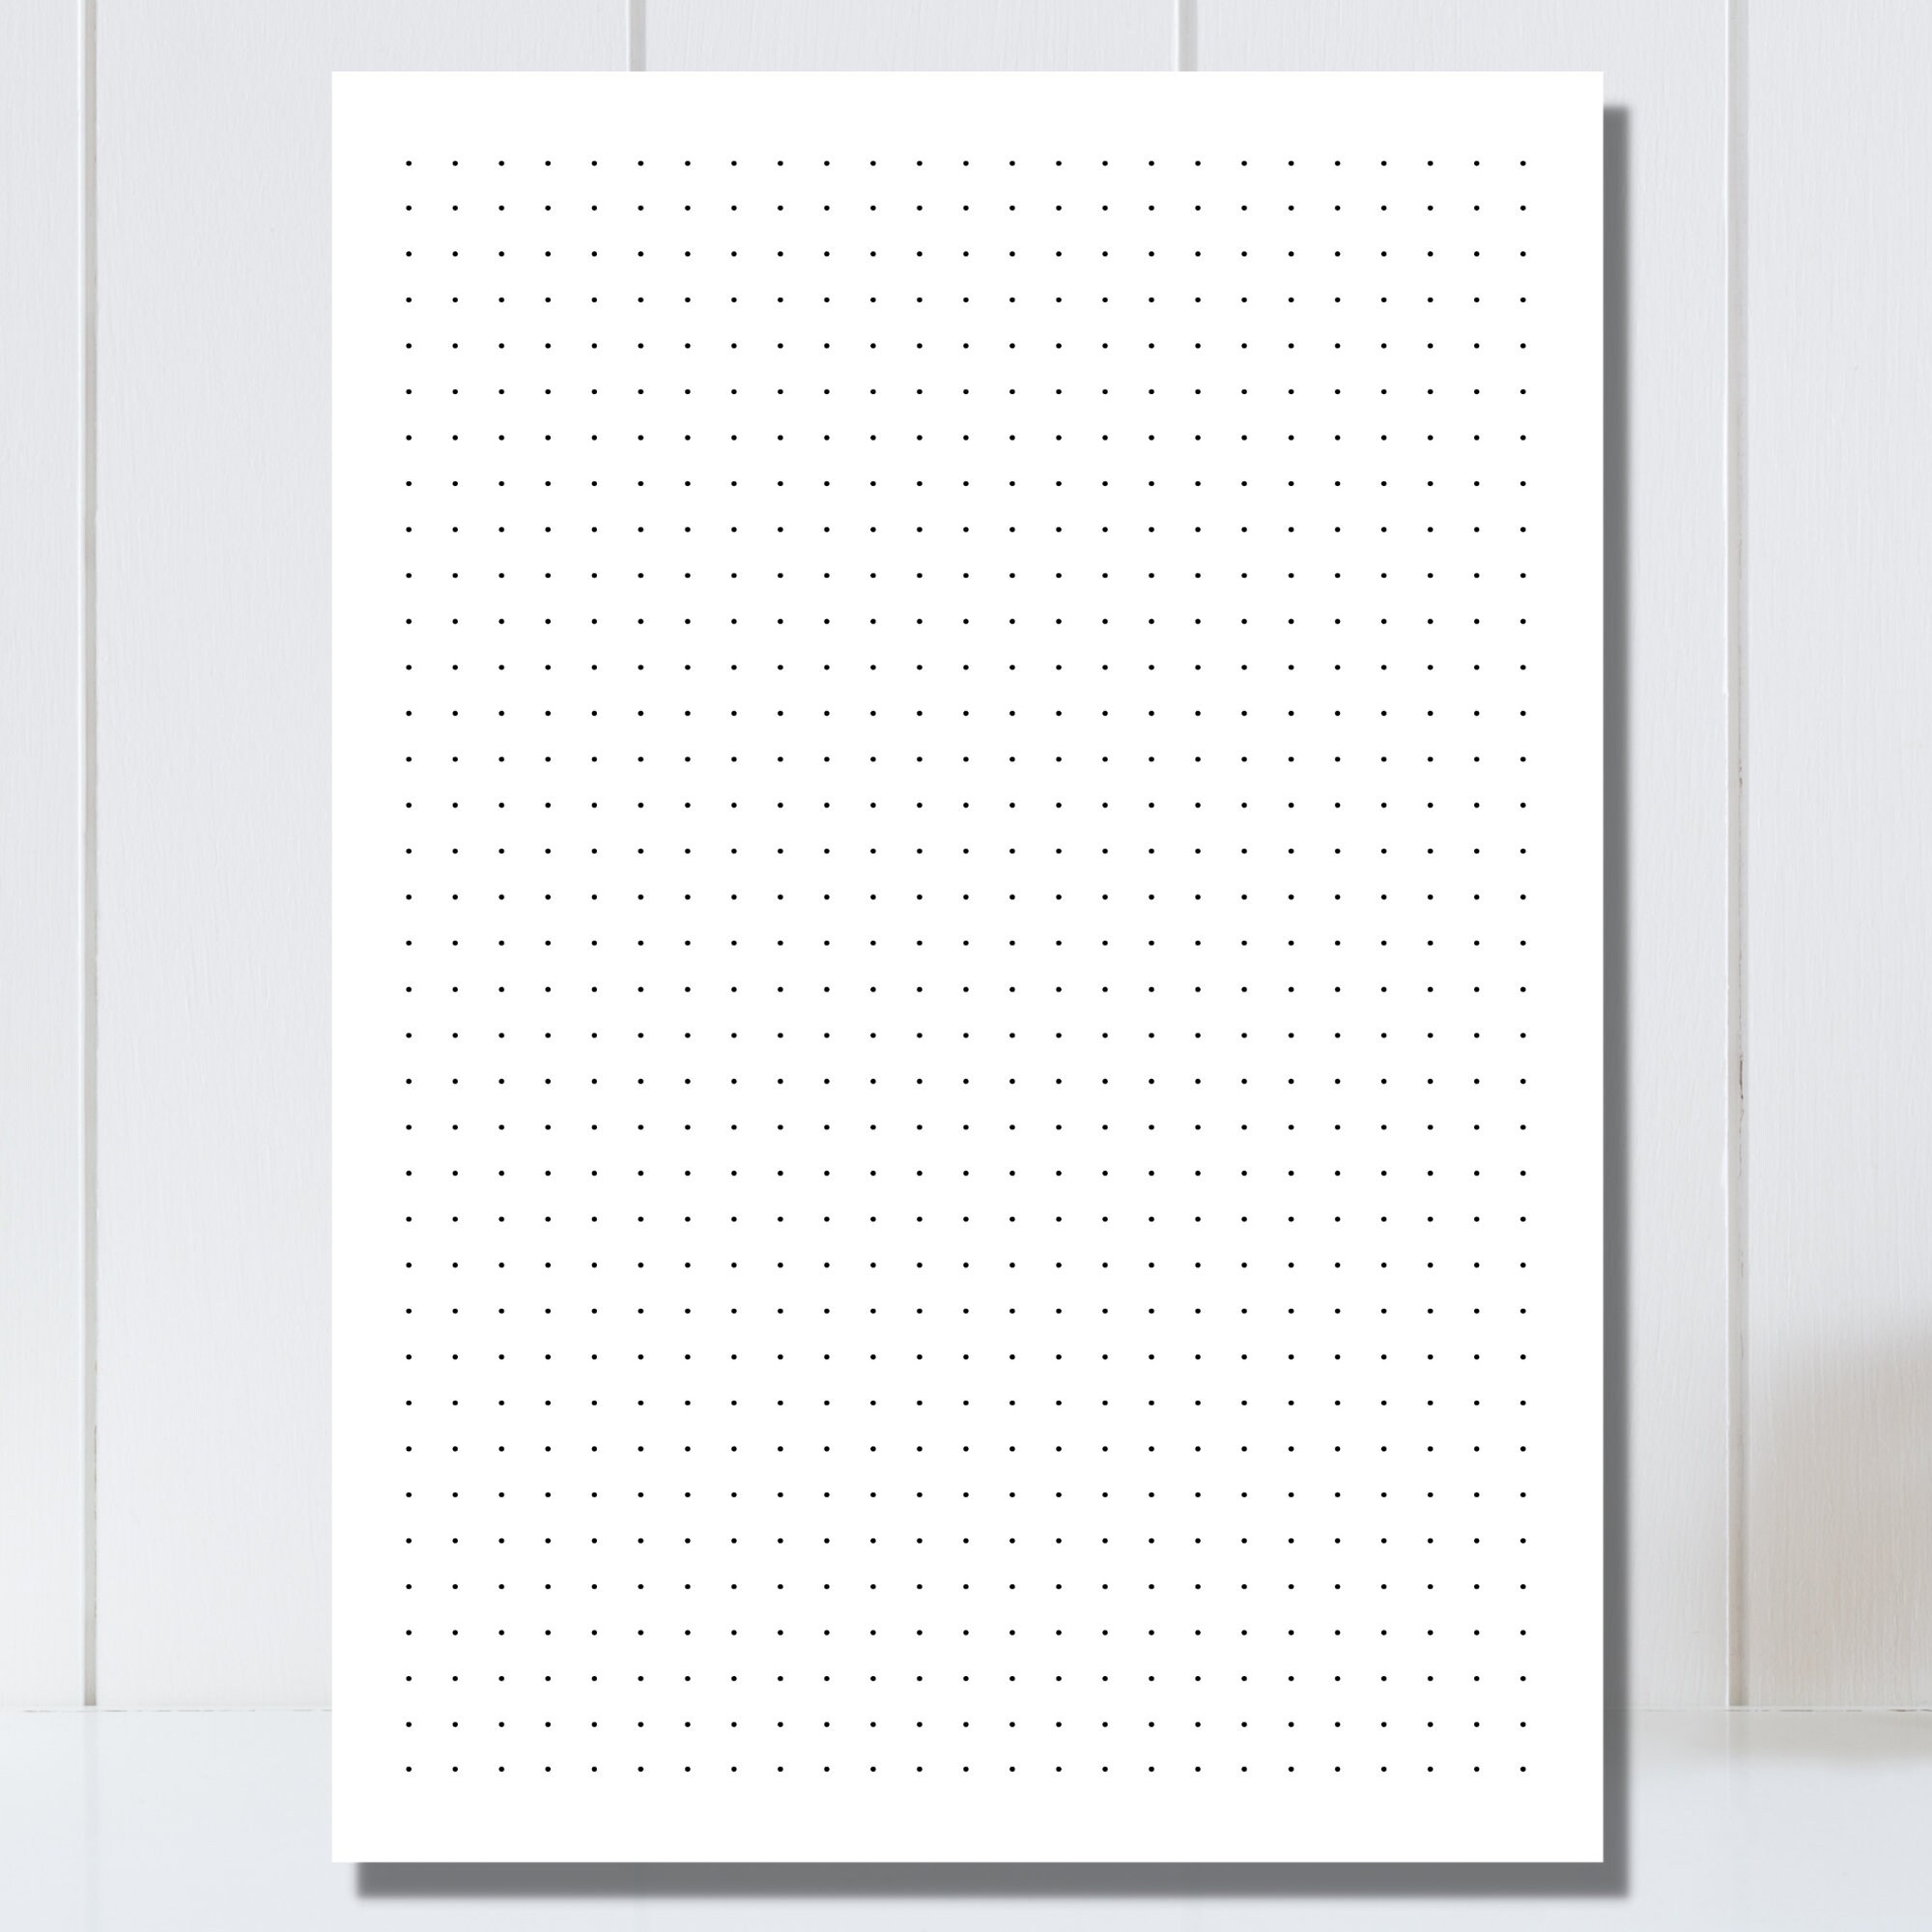 BULLET JOURNAL Dot Grid Paper, Dot Grid Paper Numbered Pages Printable,  Calligraphy Dot Grid Paper, 5mm Square Dot Grid, A4 A5 Letter PDF 